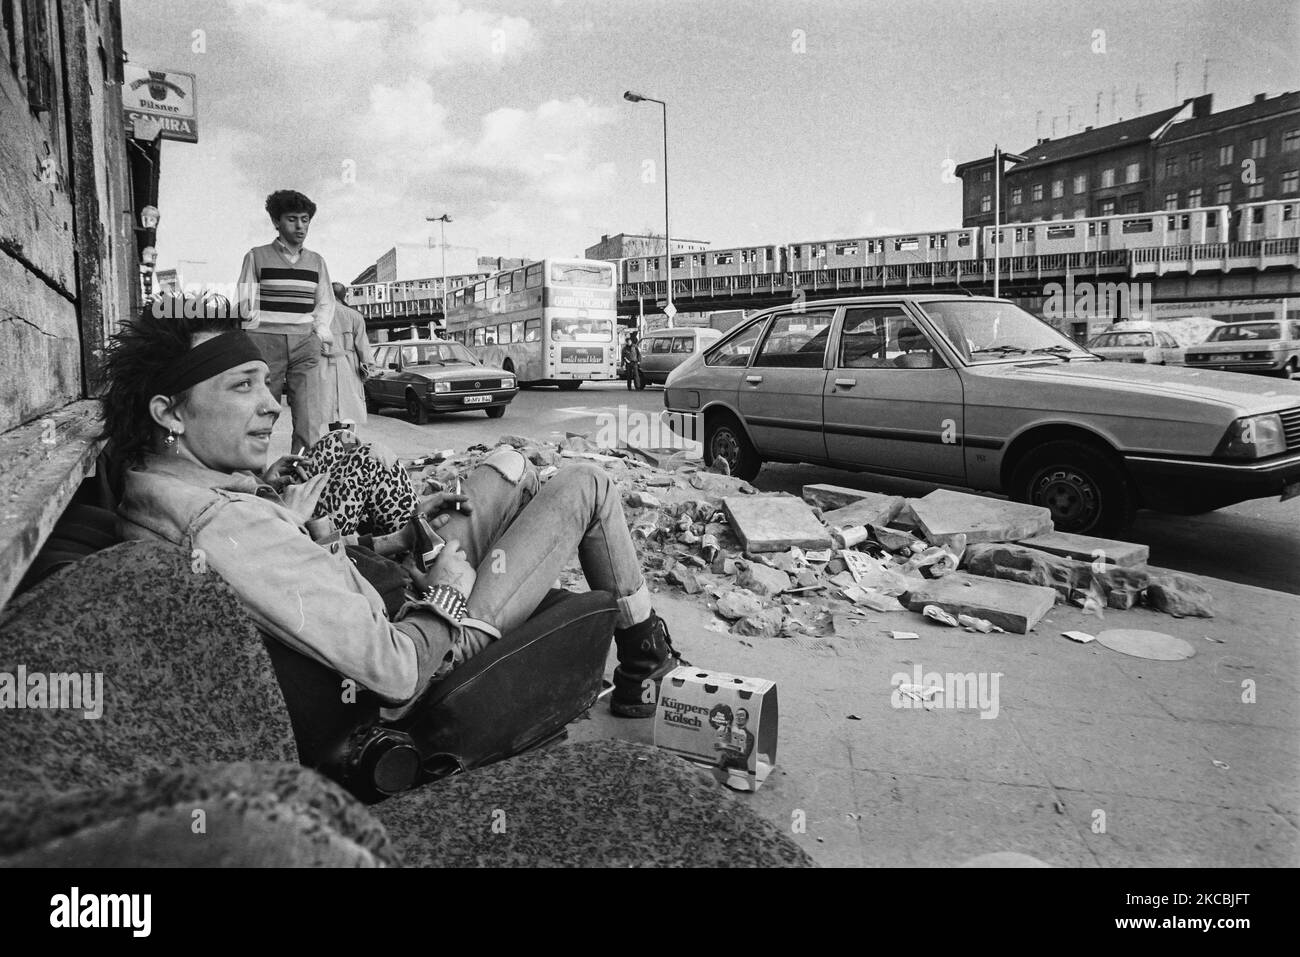 Squatters in Skalitzer strasse, West Berlin, Germany, 1983. Stock Photo